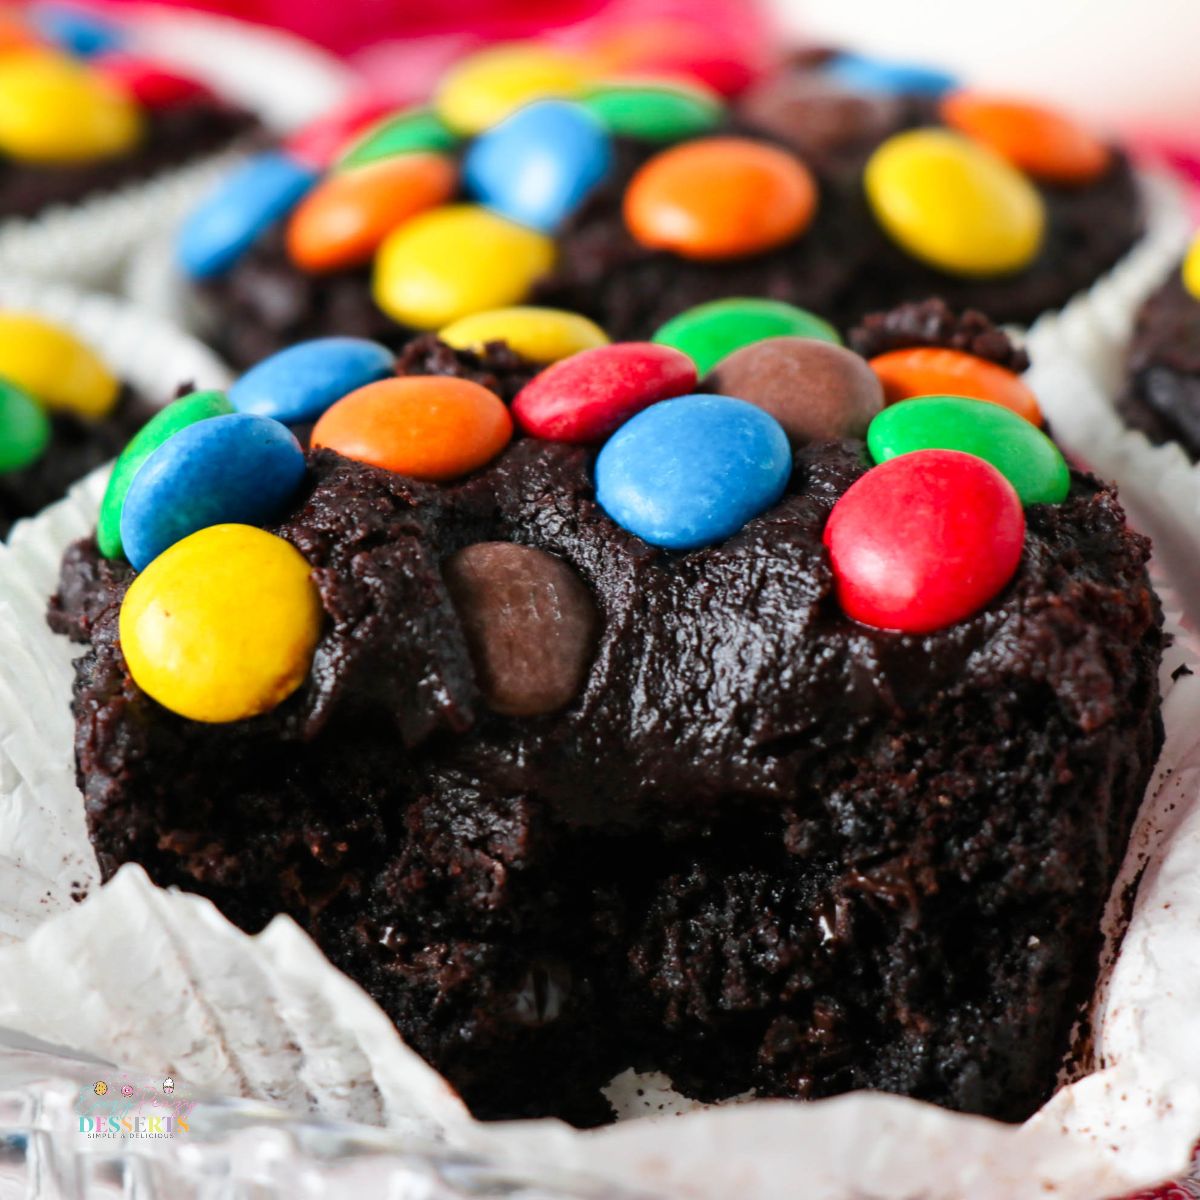 Image of brownie cupcakes with chocolate frosting and M&M's